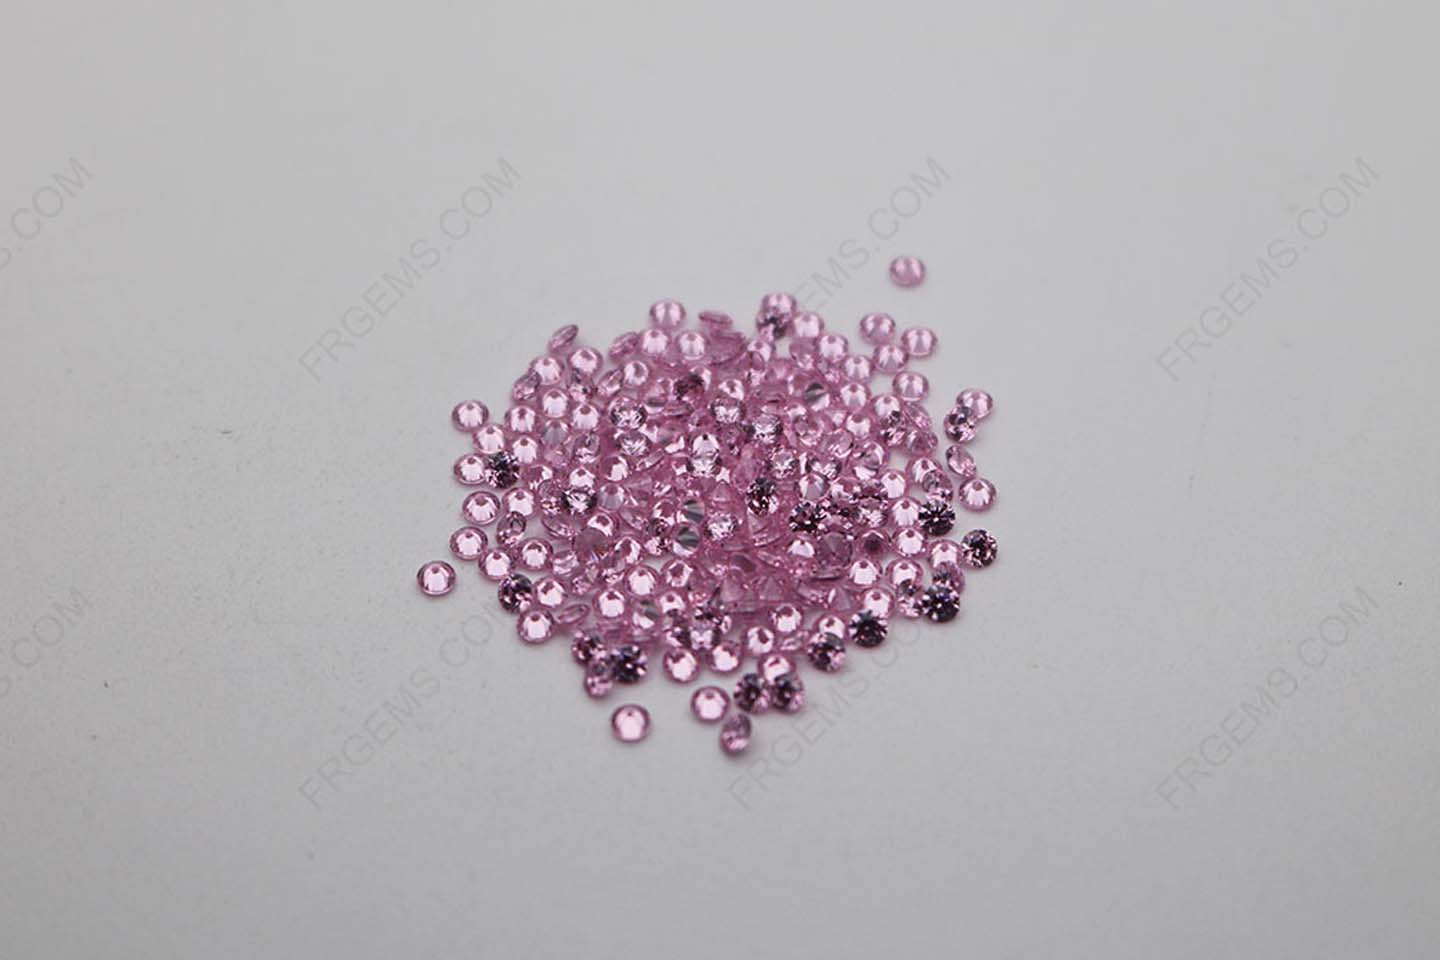 Cubic Zirconia Pink Round Shape diamond faceted cut 2mm melee stones CZ03 IMG_1024